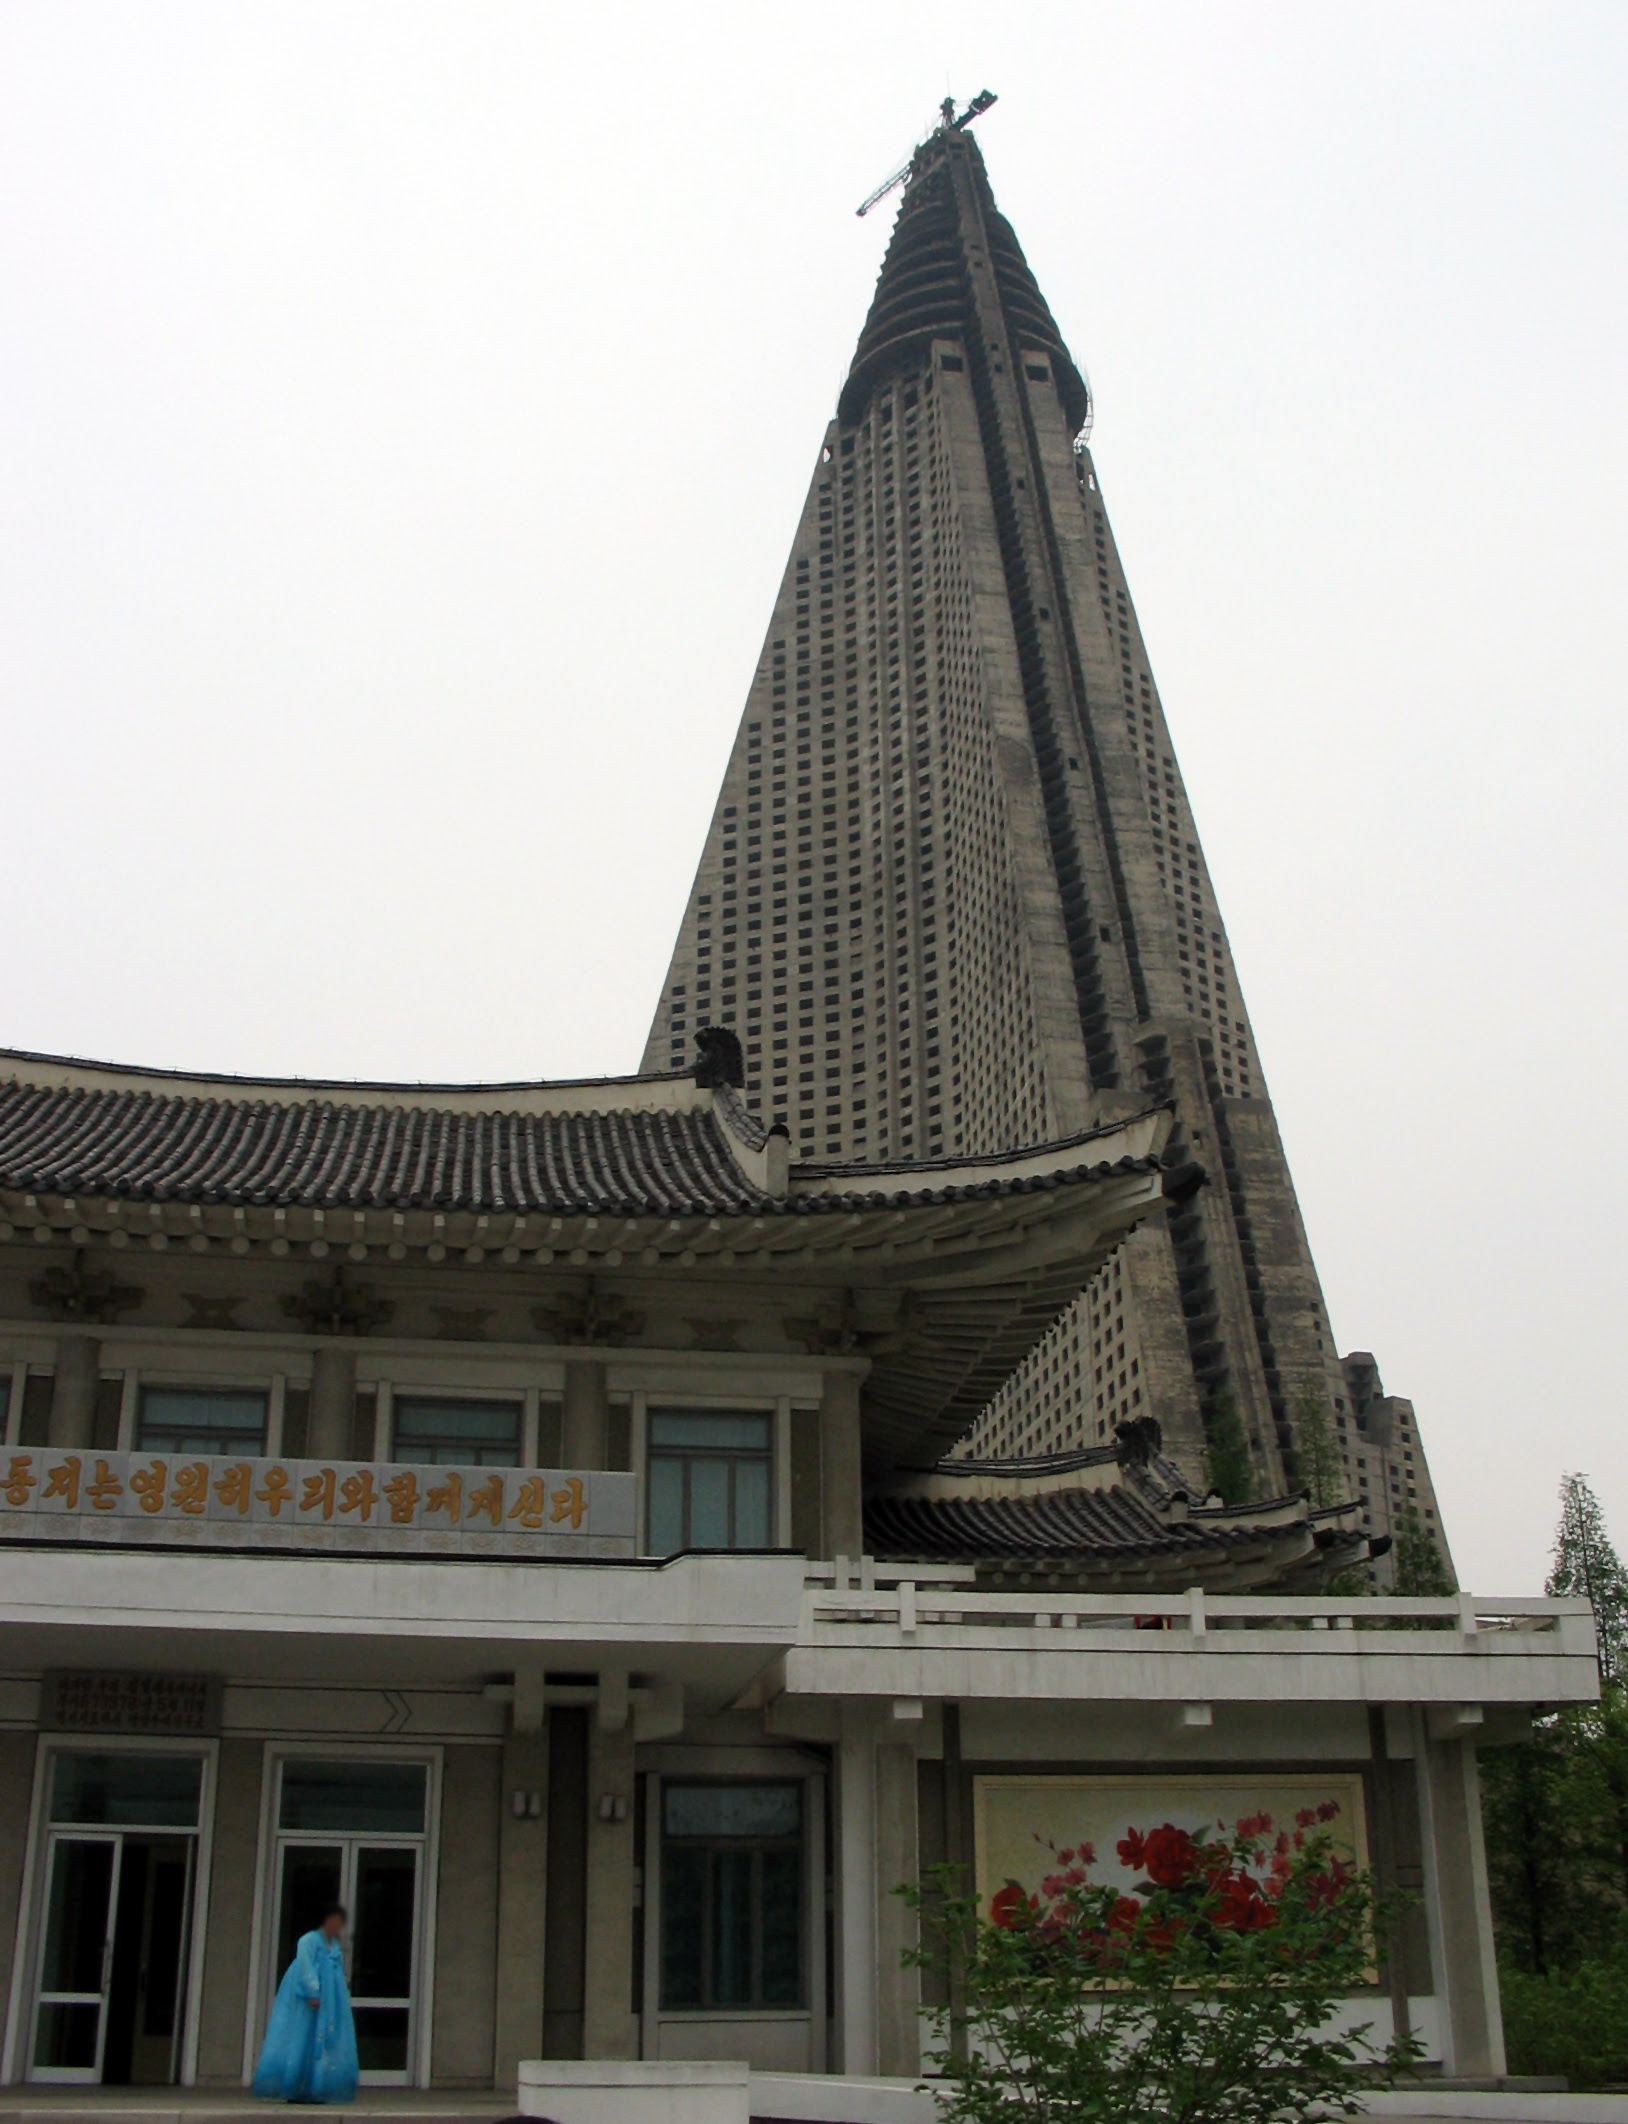 http://upload.wikimedia.org/wikipedia/commons/archive/6/6c/20070816201633!Ryugyong_Hotel_-_May_2005.JPG